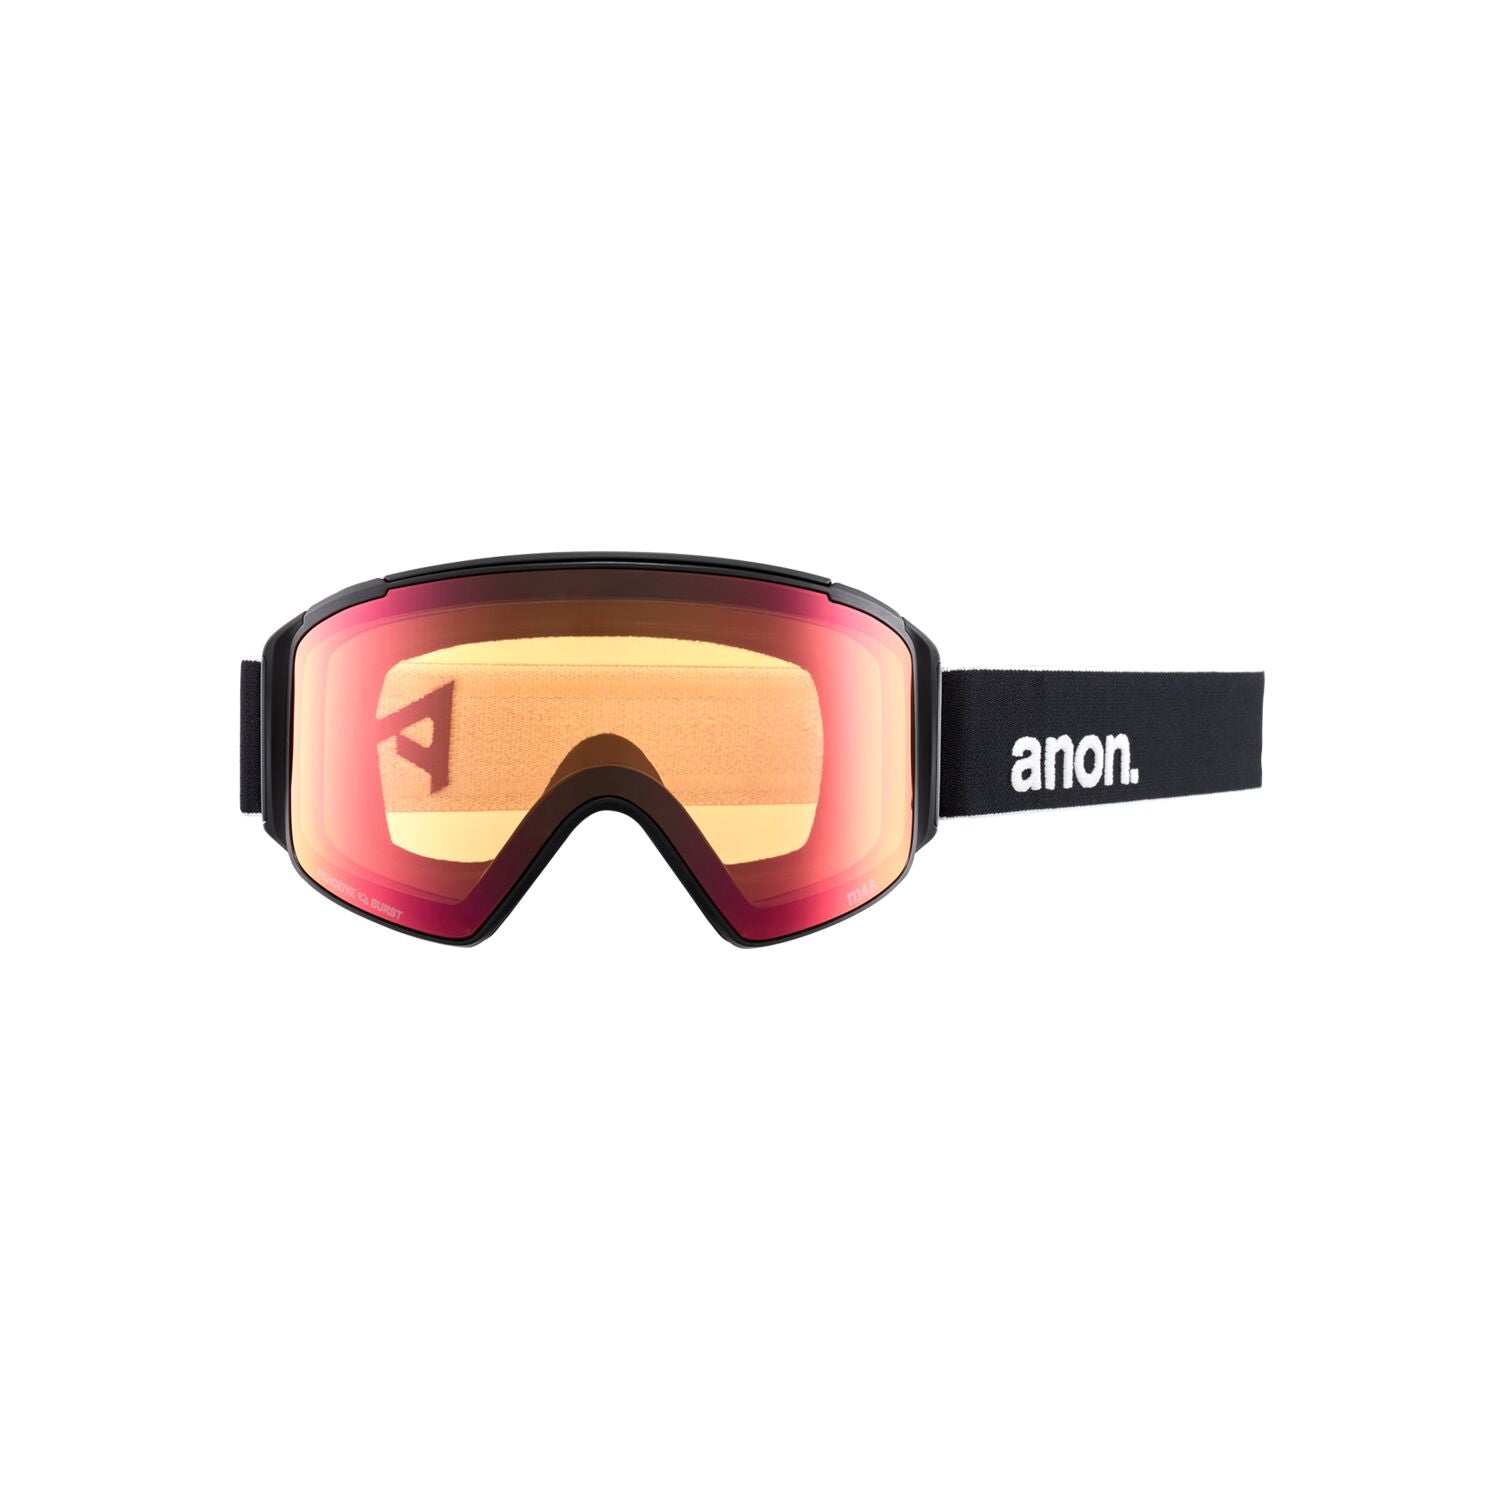 Anon M4S Cylindrical Goggles + Bonus Lens + MFI Face Mask Black Perceive Sunny Red Snow Goggles